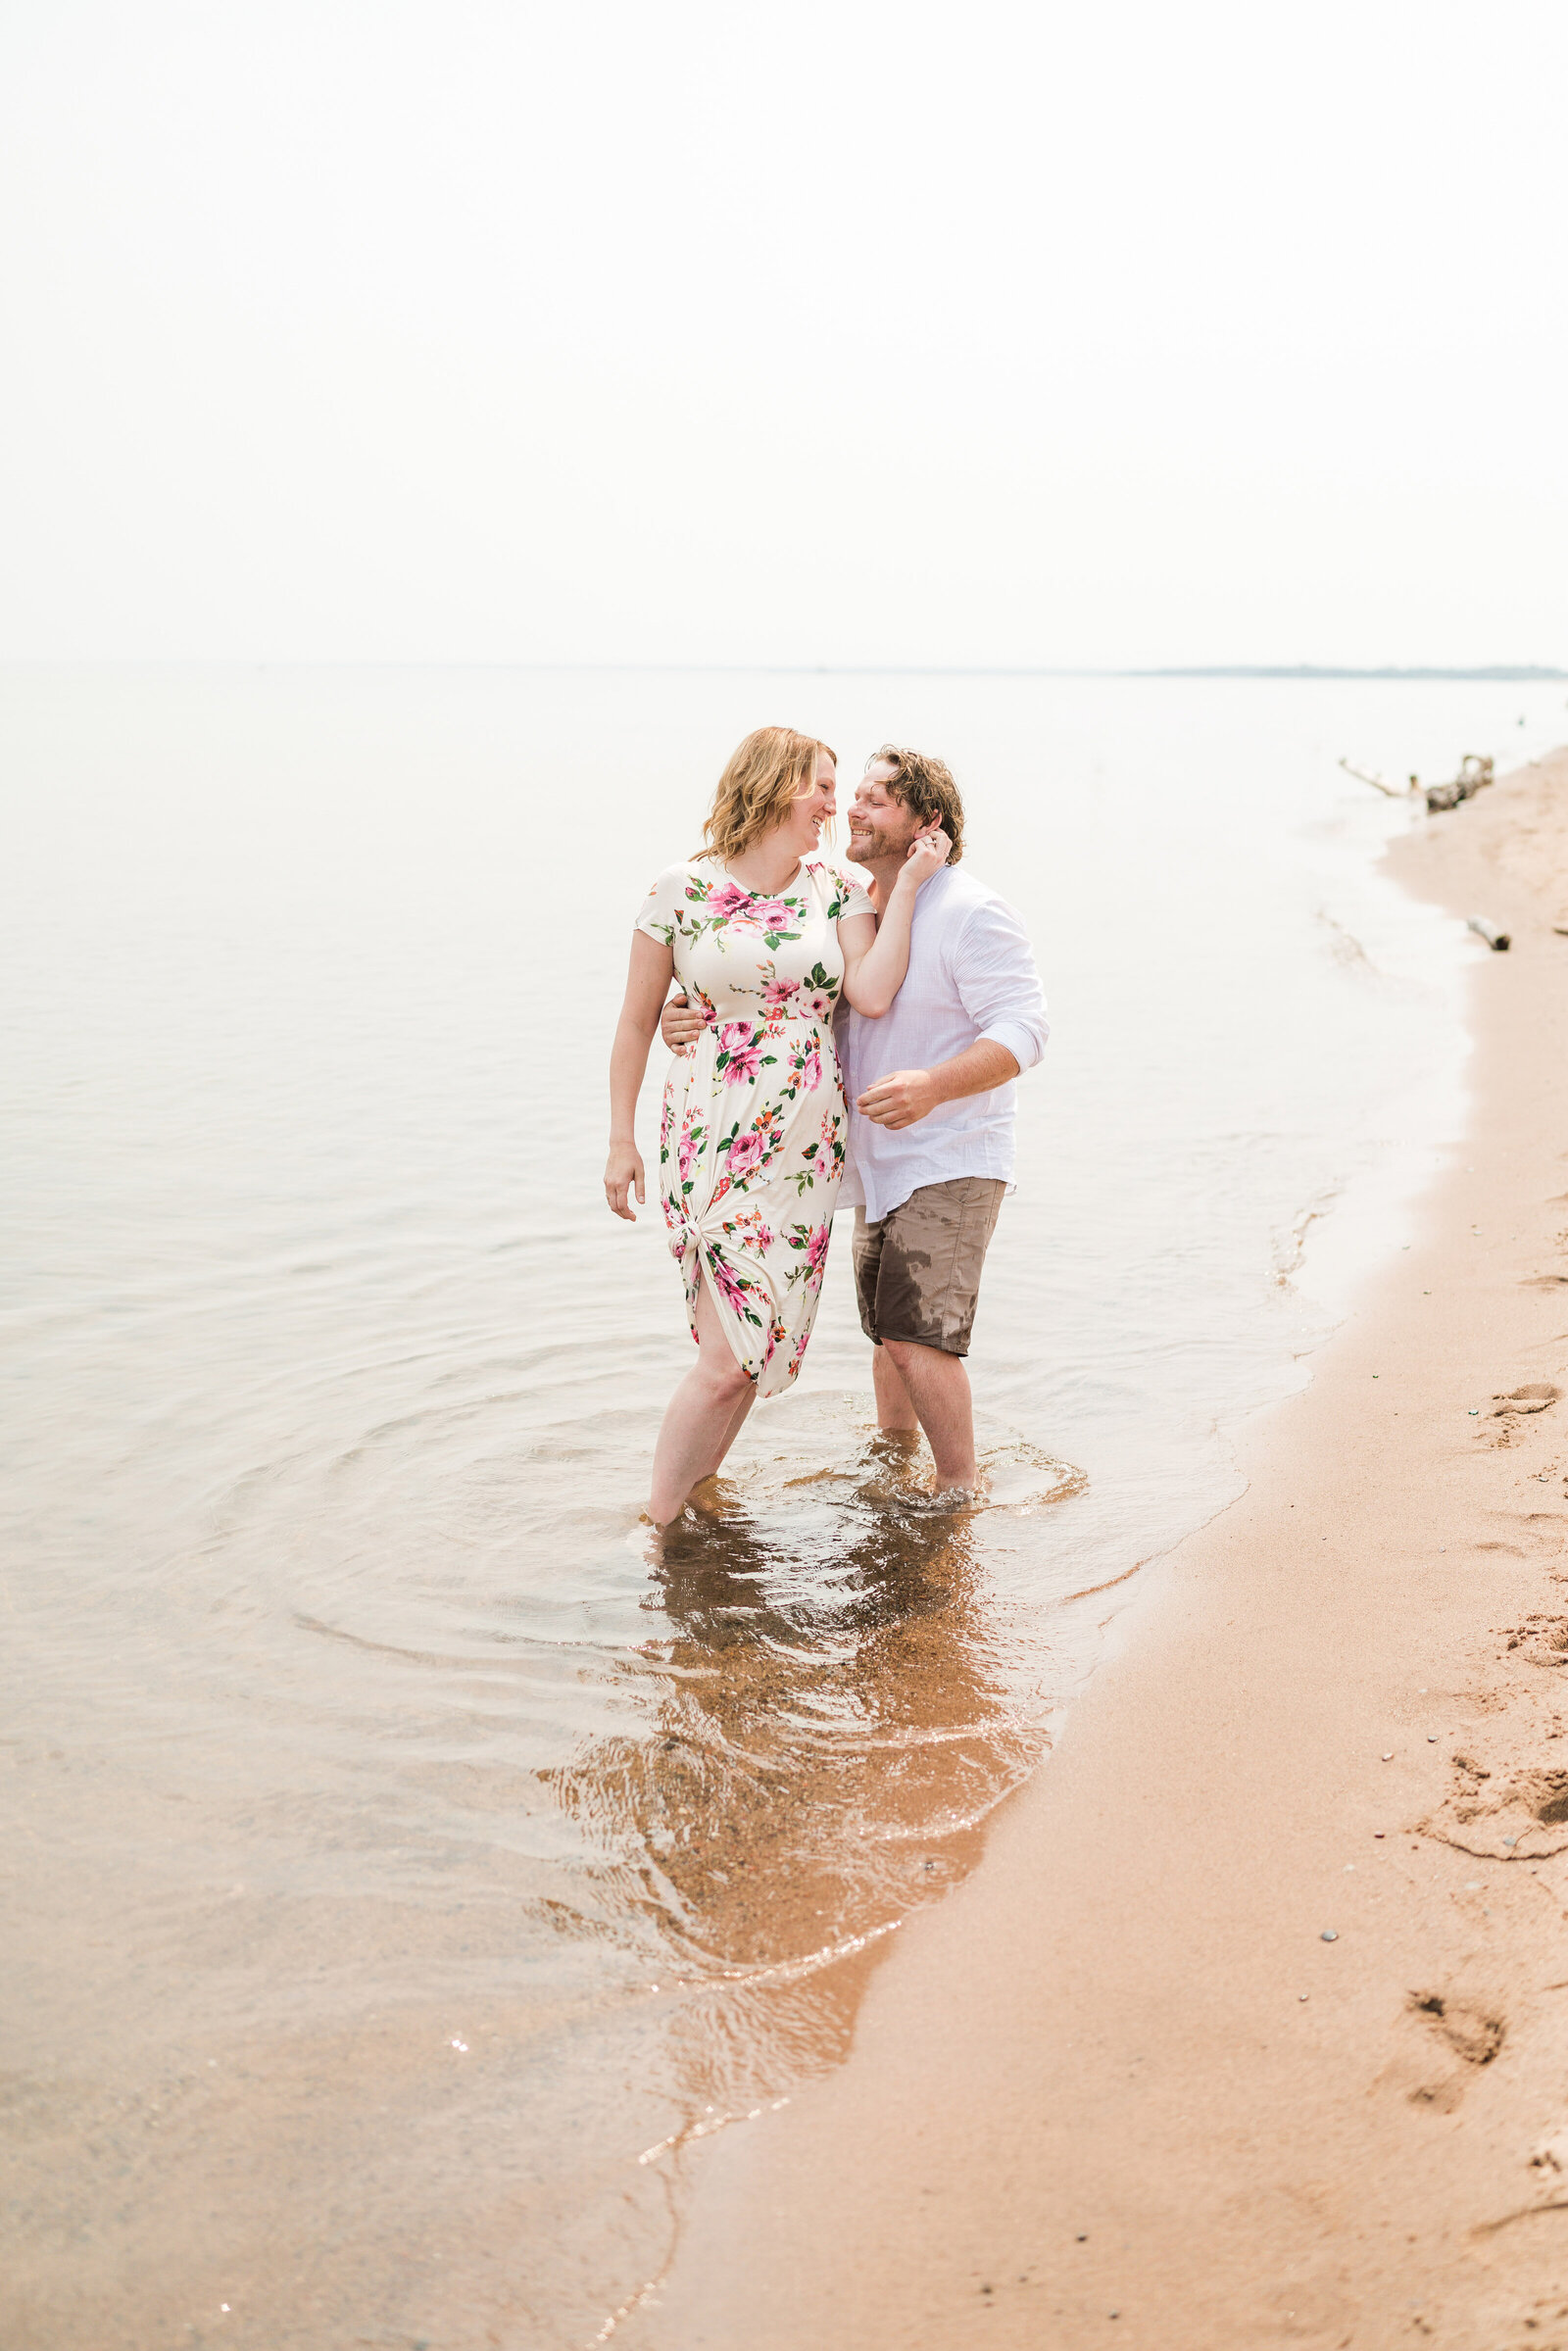 Ashlee and Nate - Minnesota Engagement Photography - Park Point Beach - Duluth - RKH Images  (311 of 416)